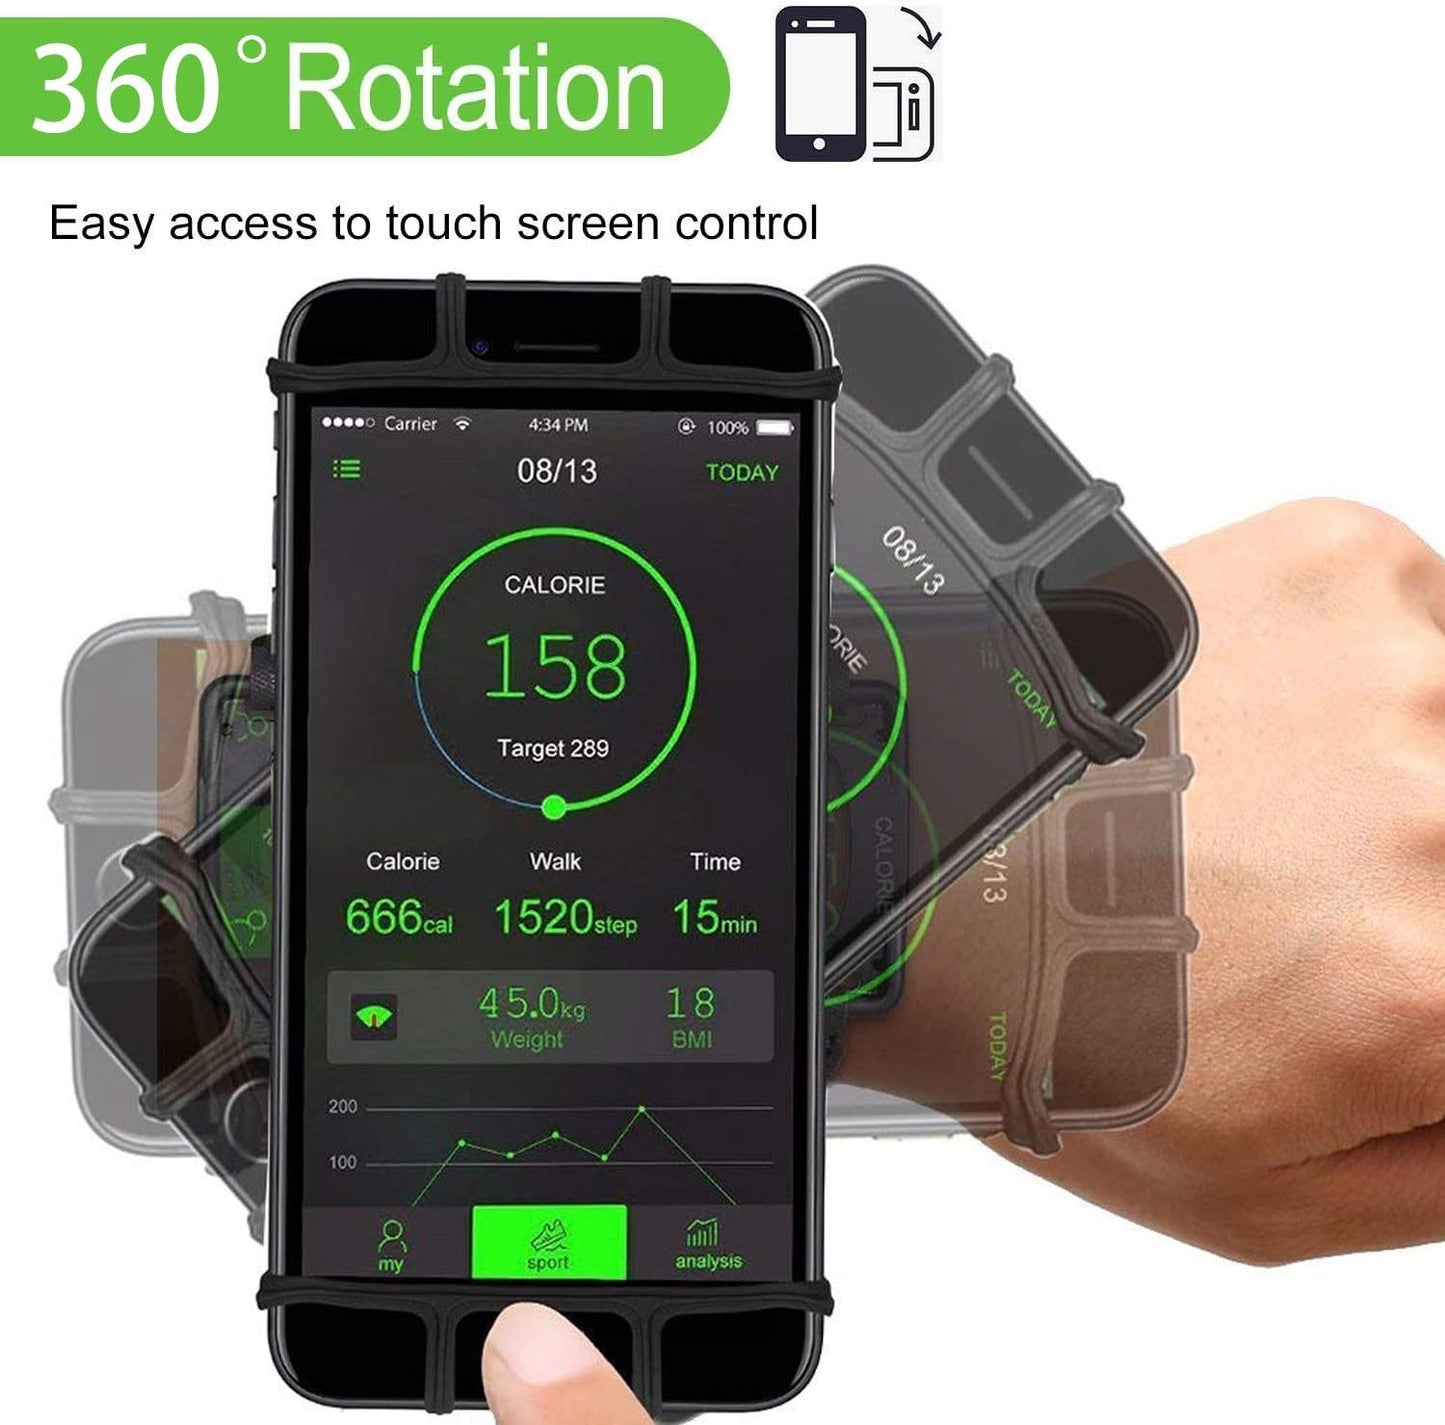 Wristband Phone Holder,HCcolo 360°Rotatable Universal Sports Wristband for iPhone X/8 Plus/8/7/6s,Galaxy S9 Plus/S9/S8 & Other 4”-6.5”Smartphone,Running Armband for Hiking Biking Walking (Wrist)